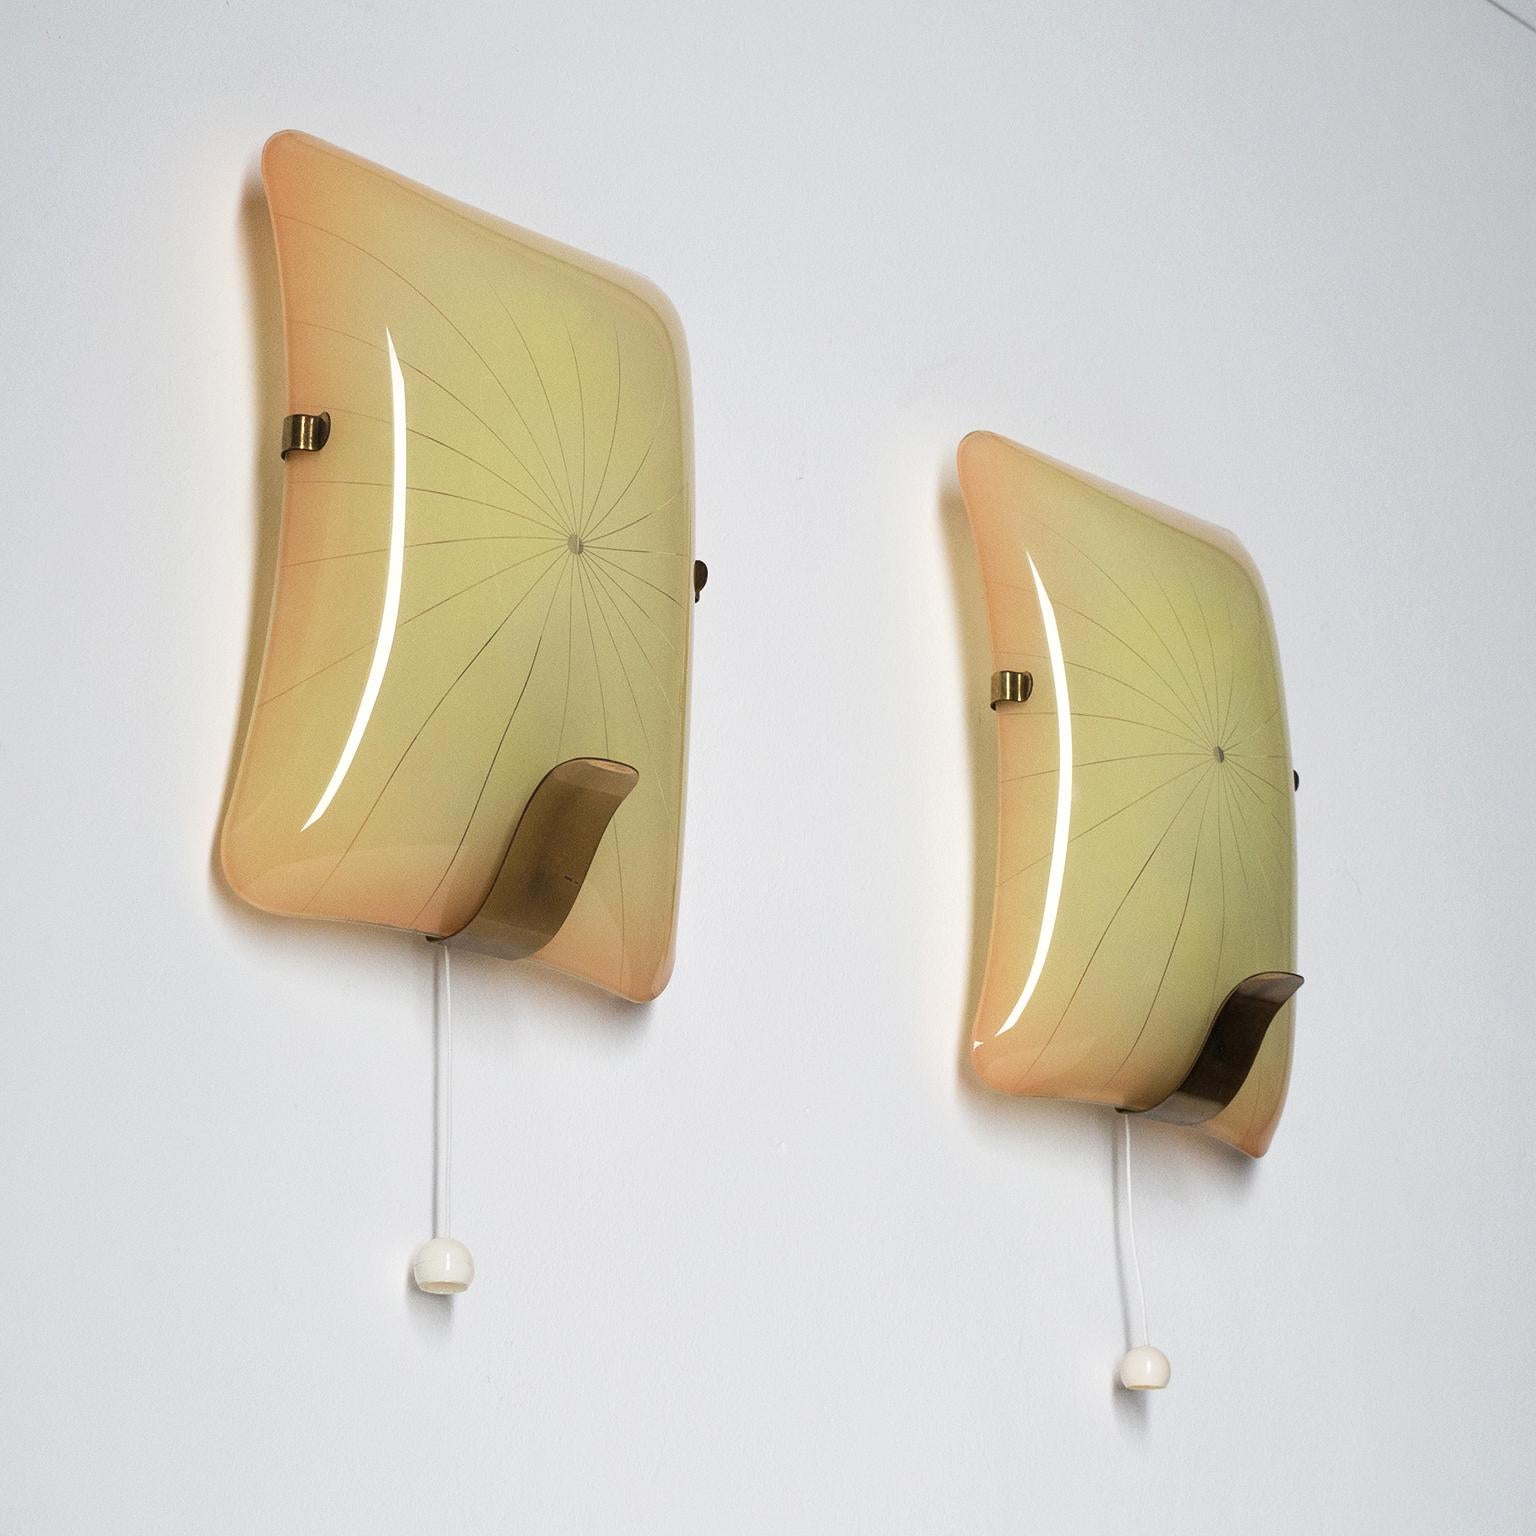 Rare pair of Art Deco sconces in enameled glass with brass details, 1940s. The curved rectangular glass with rounded edges is enameled on the backside with a gradient (going from cream in the center to peach on the edges) with radial and curved